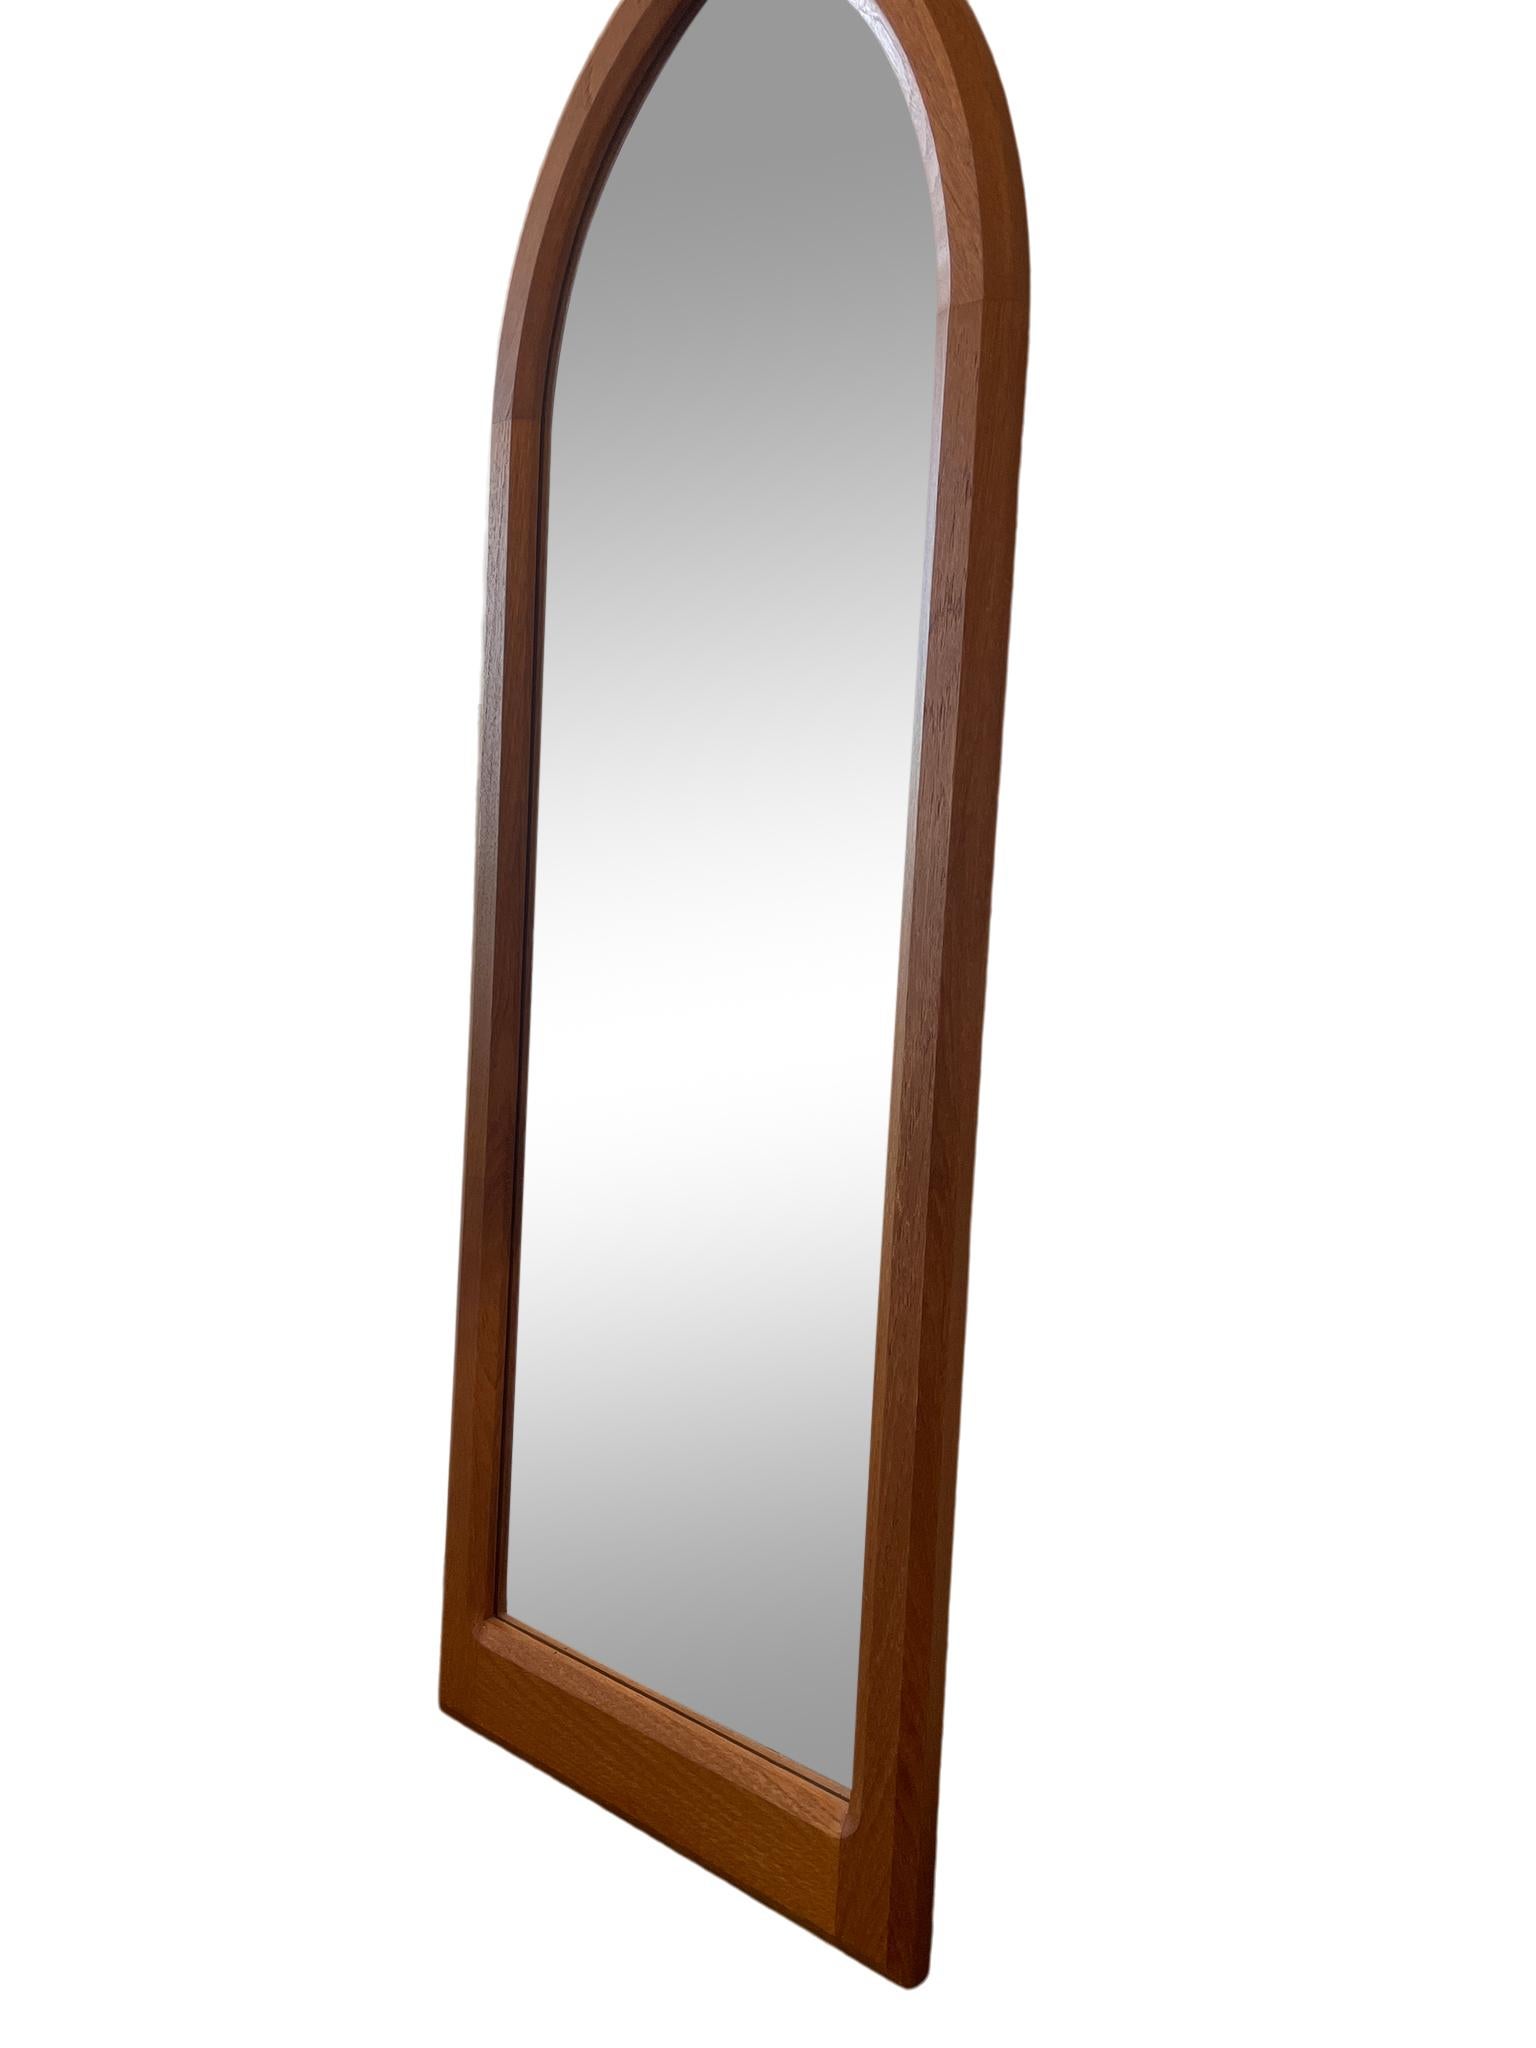 Mid Century Danish modern teak wall mirror unique Gothic arch shape original vintage condition. Made in Denmark. Located in Brooklyn NYC.

Measures: 17